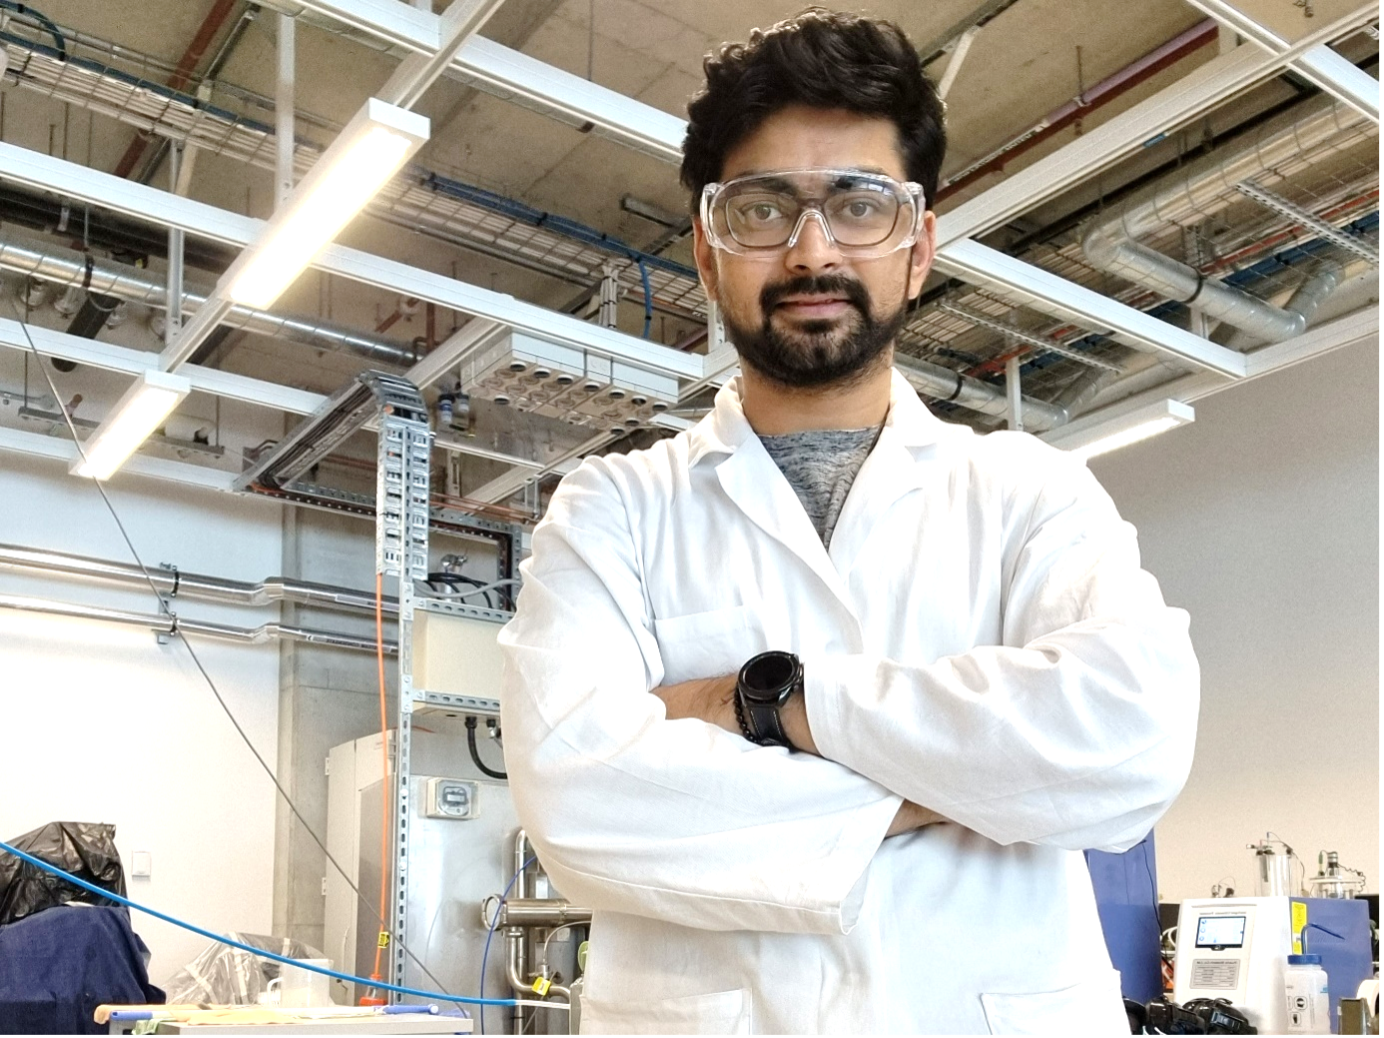 UNSW PhD student Rishi Ravindra Naik is looking to develop new products with ‘clean label’ and sustainability claims by modifying non-traditional plant proteins with seaweeds for improved techno-functionality.